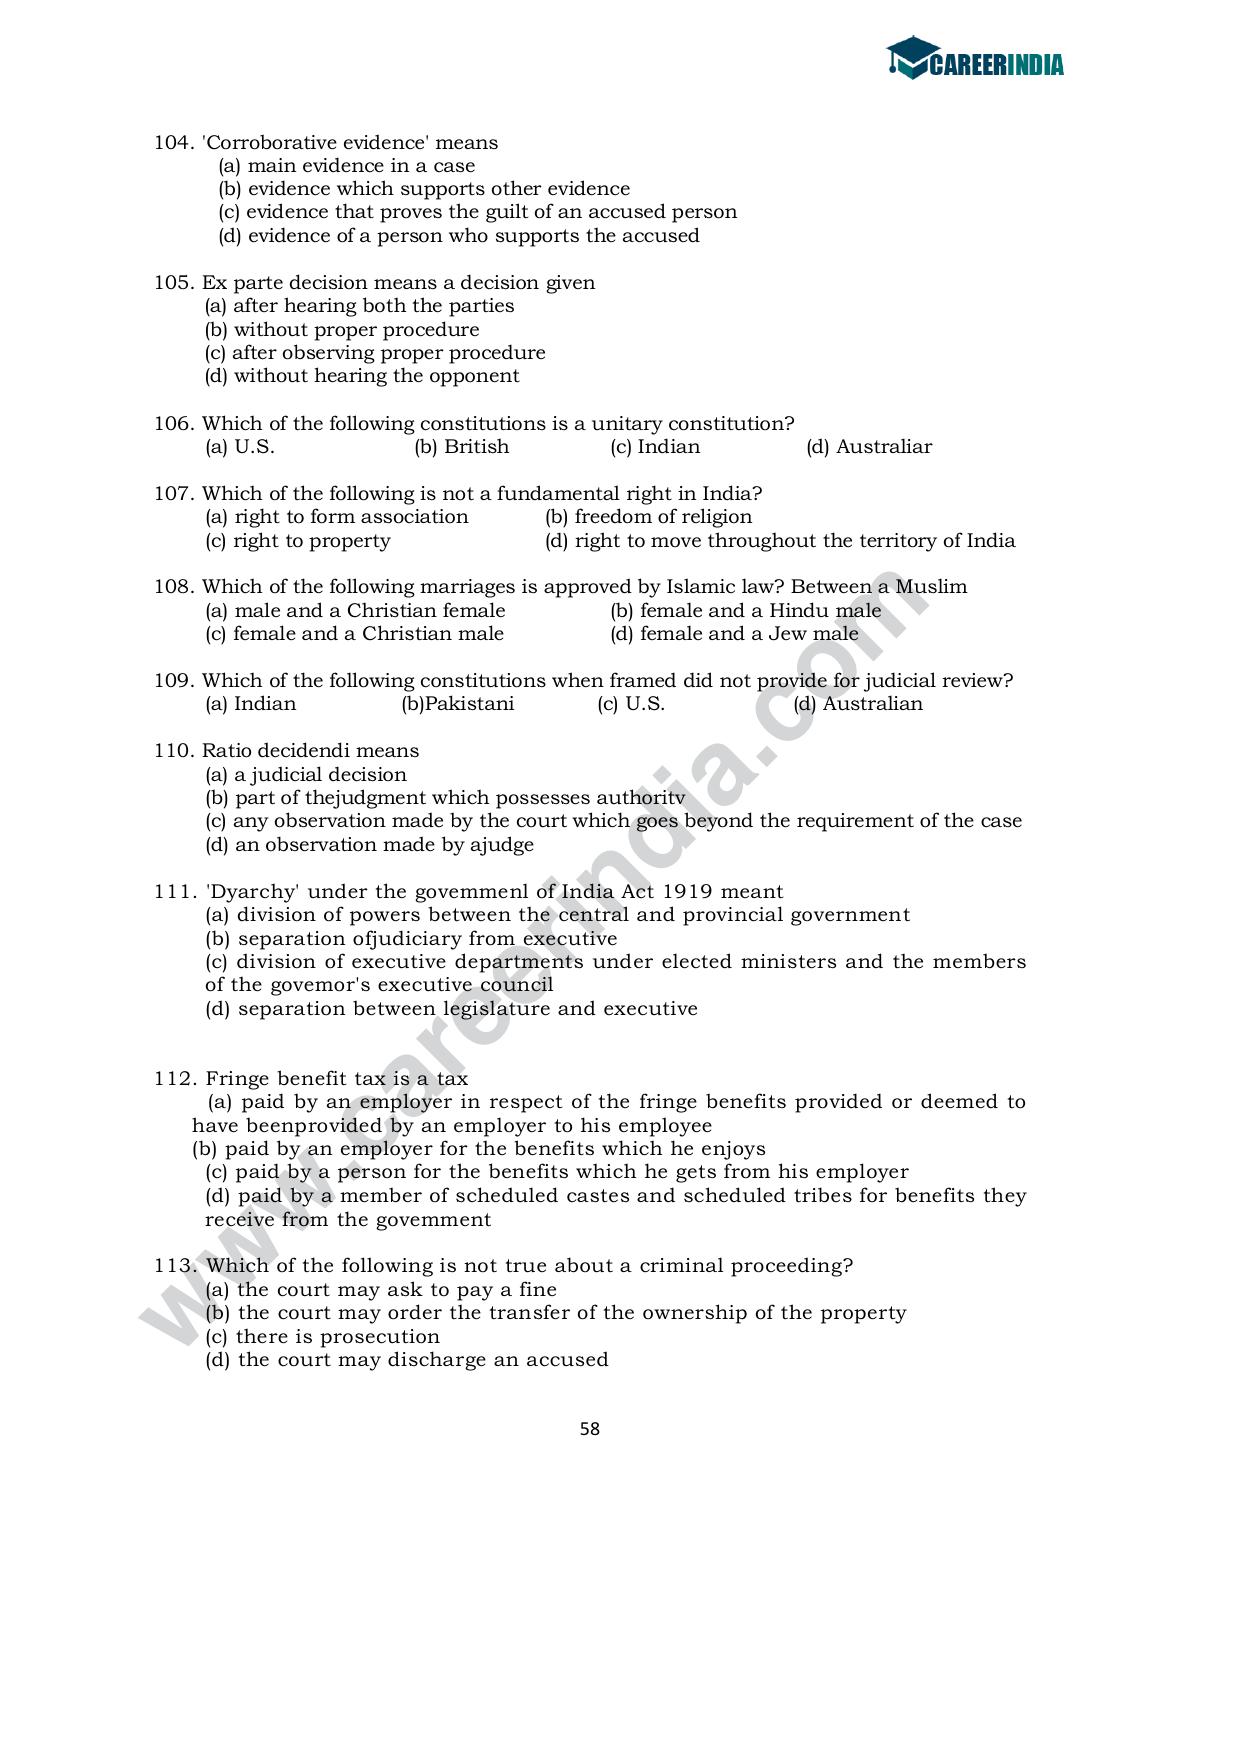 CLAT 2010 UG Sample Question Paper - Page 11